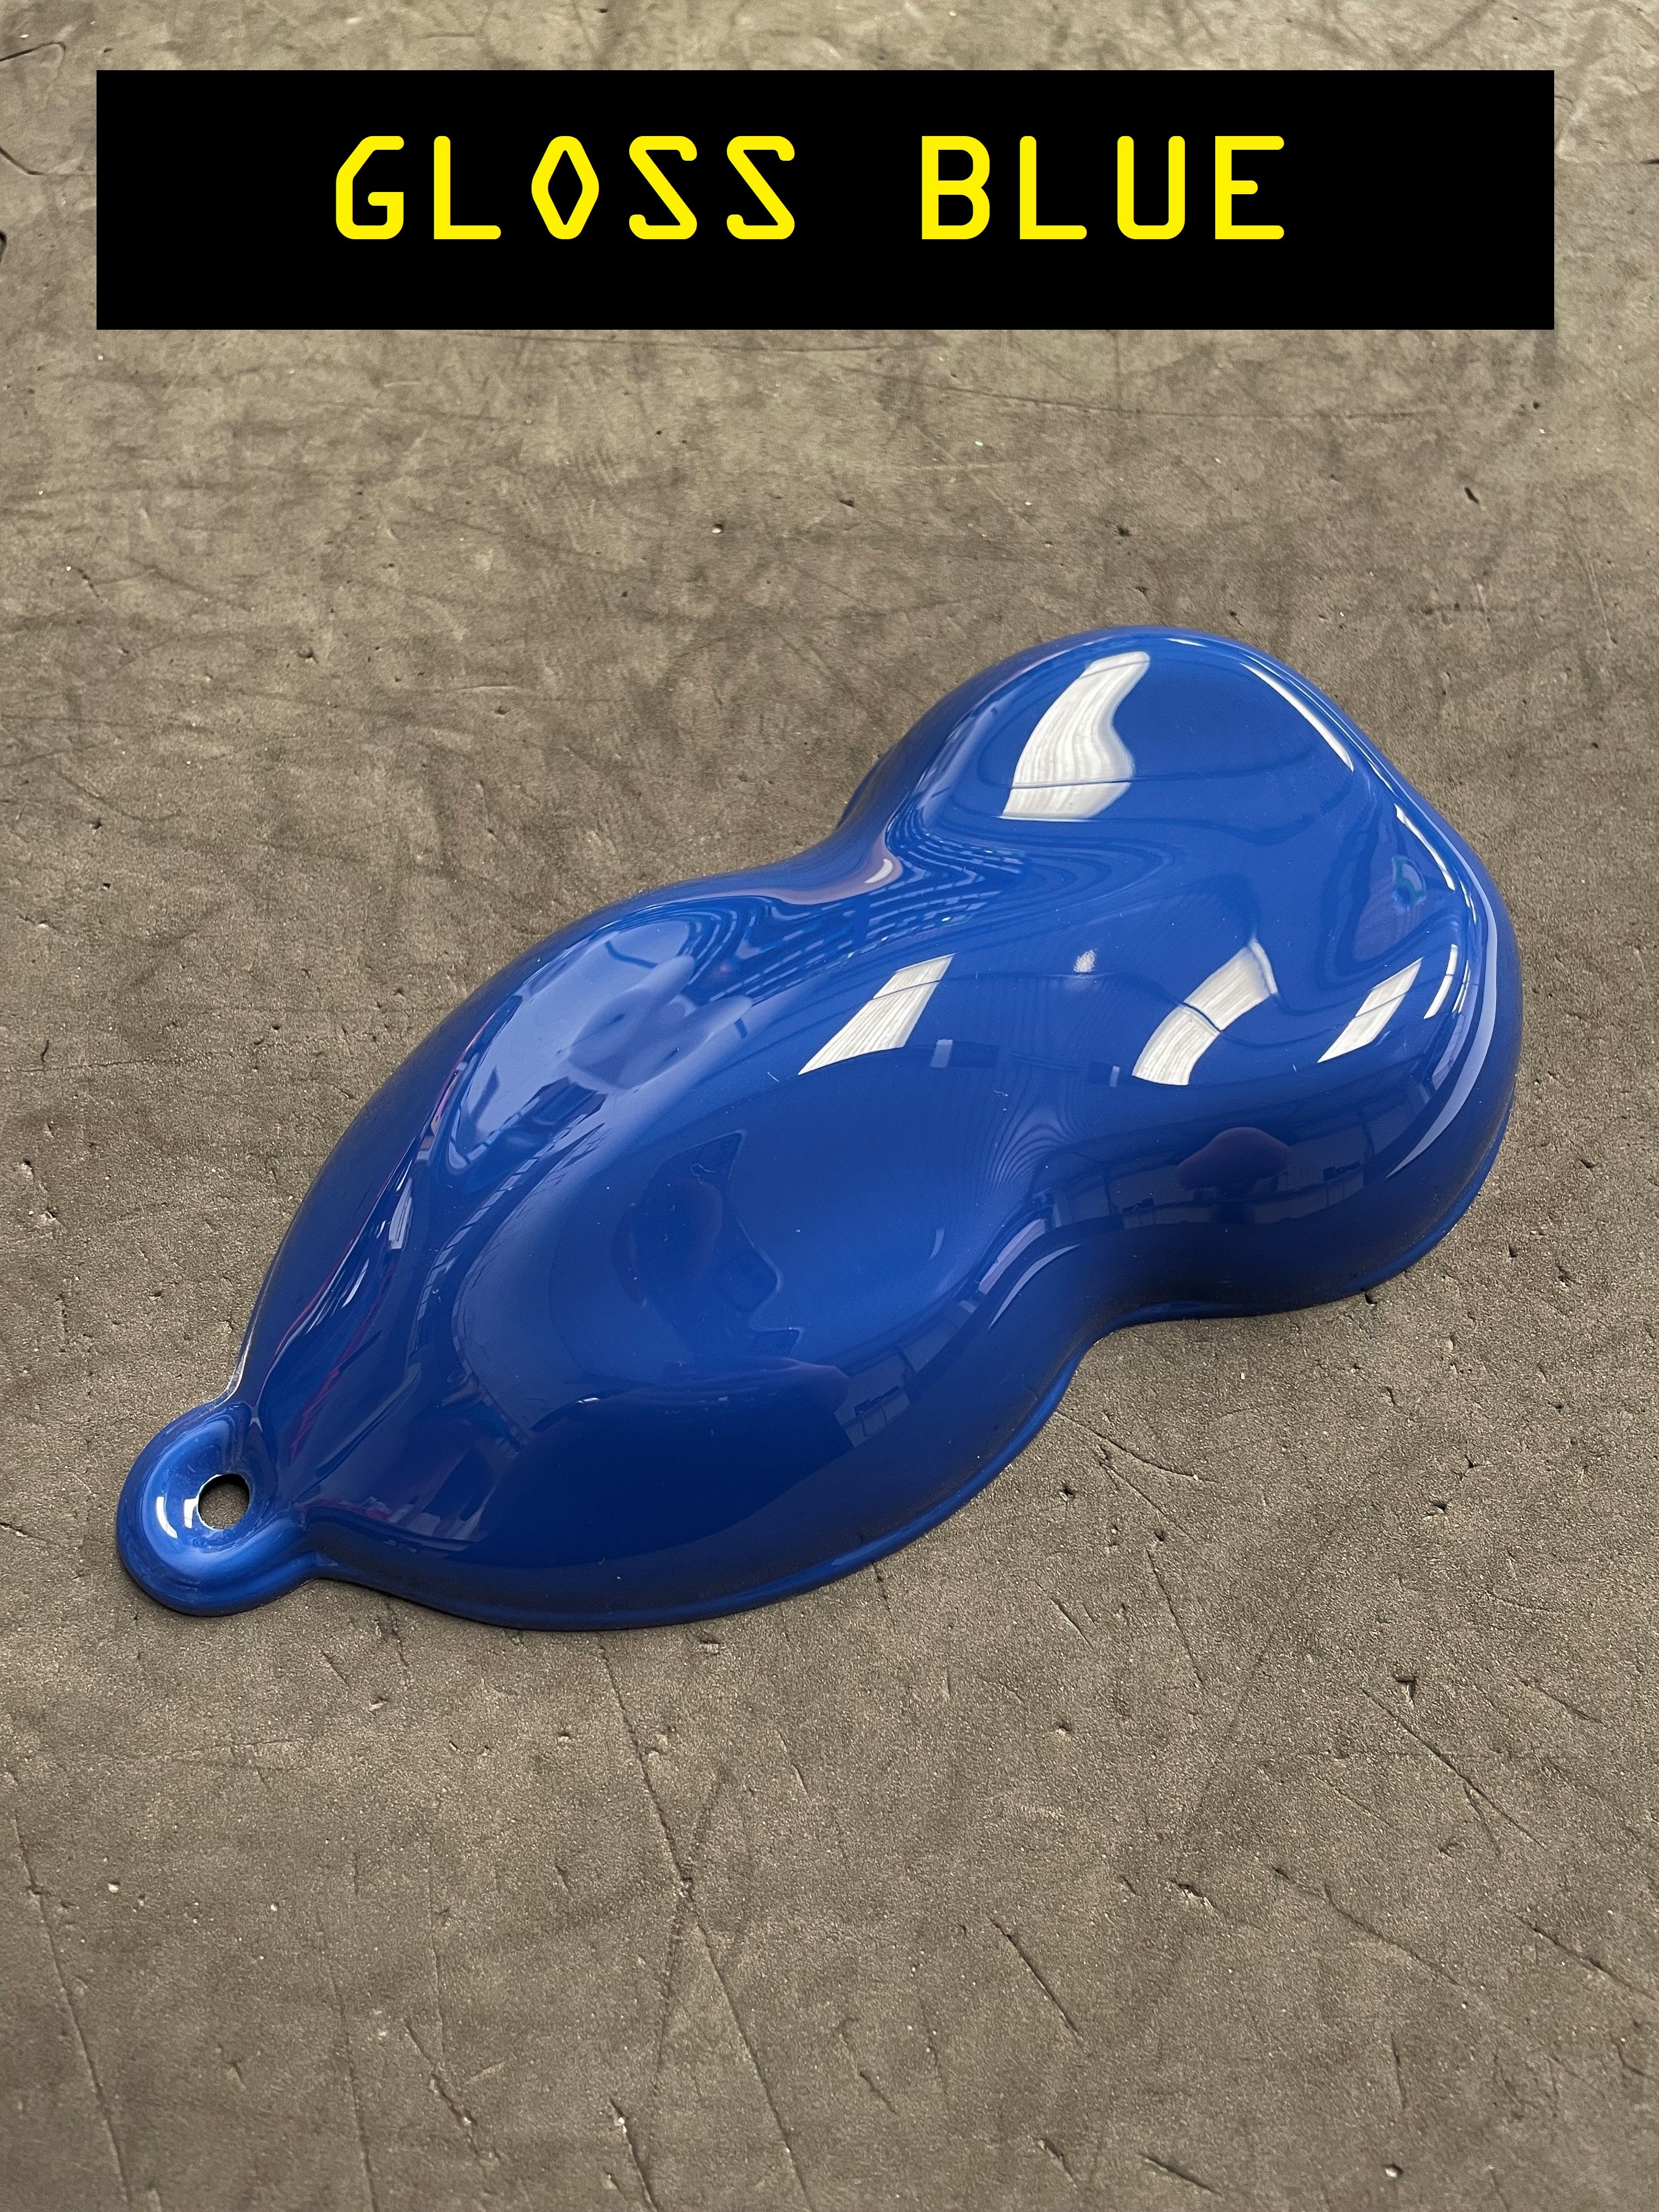 Proform Coolant Tank Cover - Mk4/4.5 Ford Focus (Plastic Finishes)